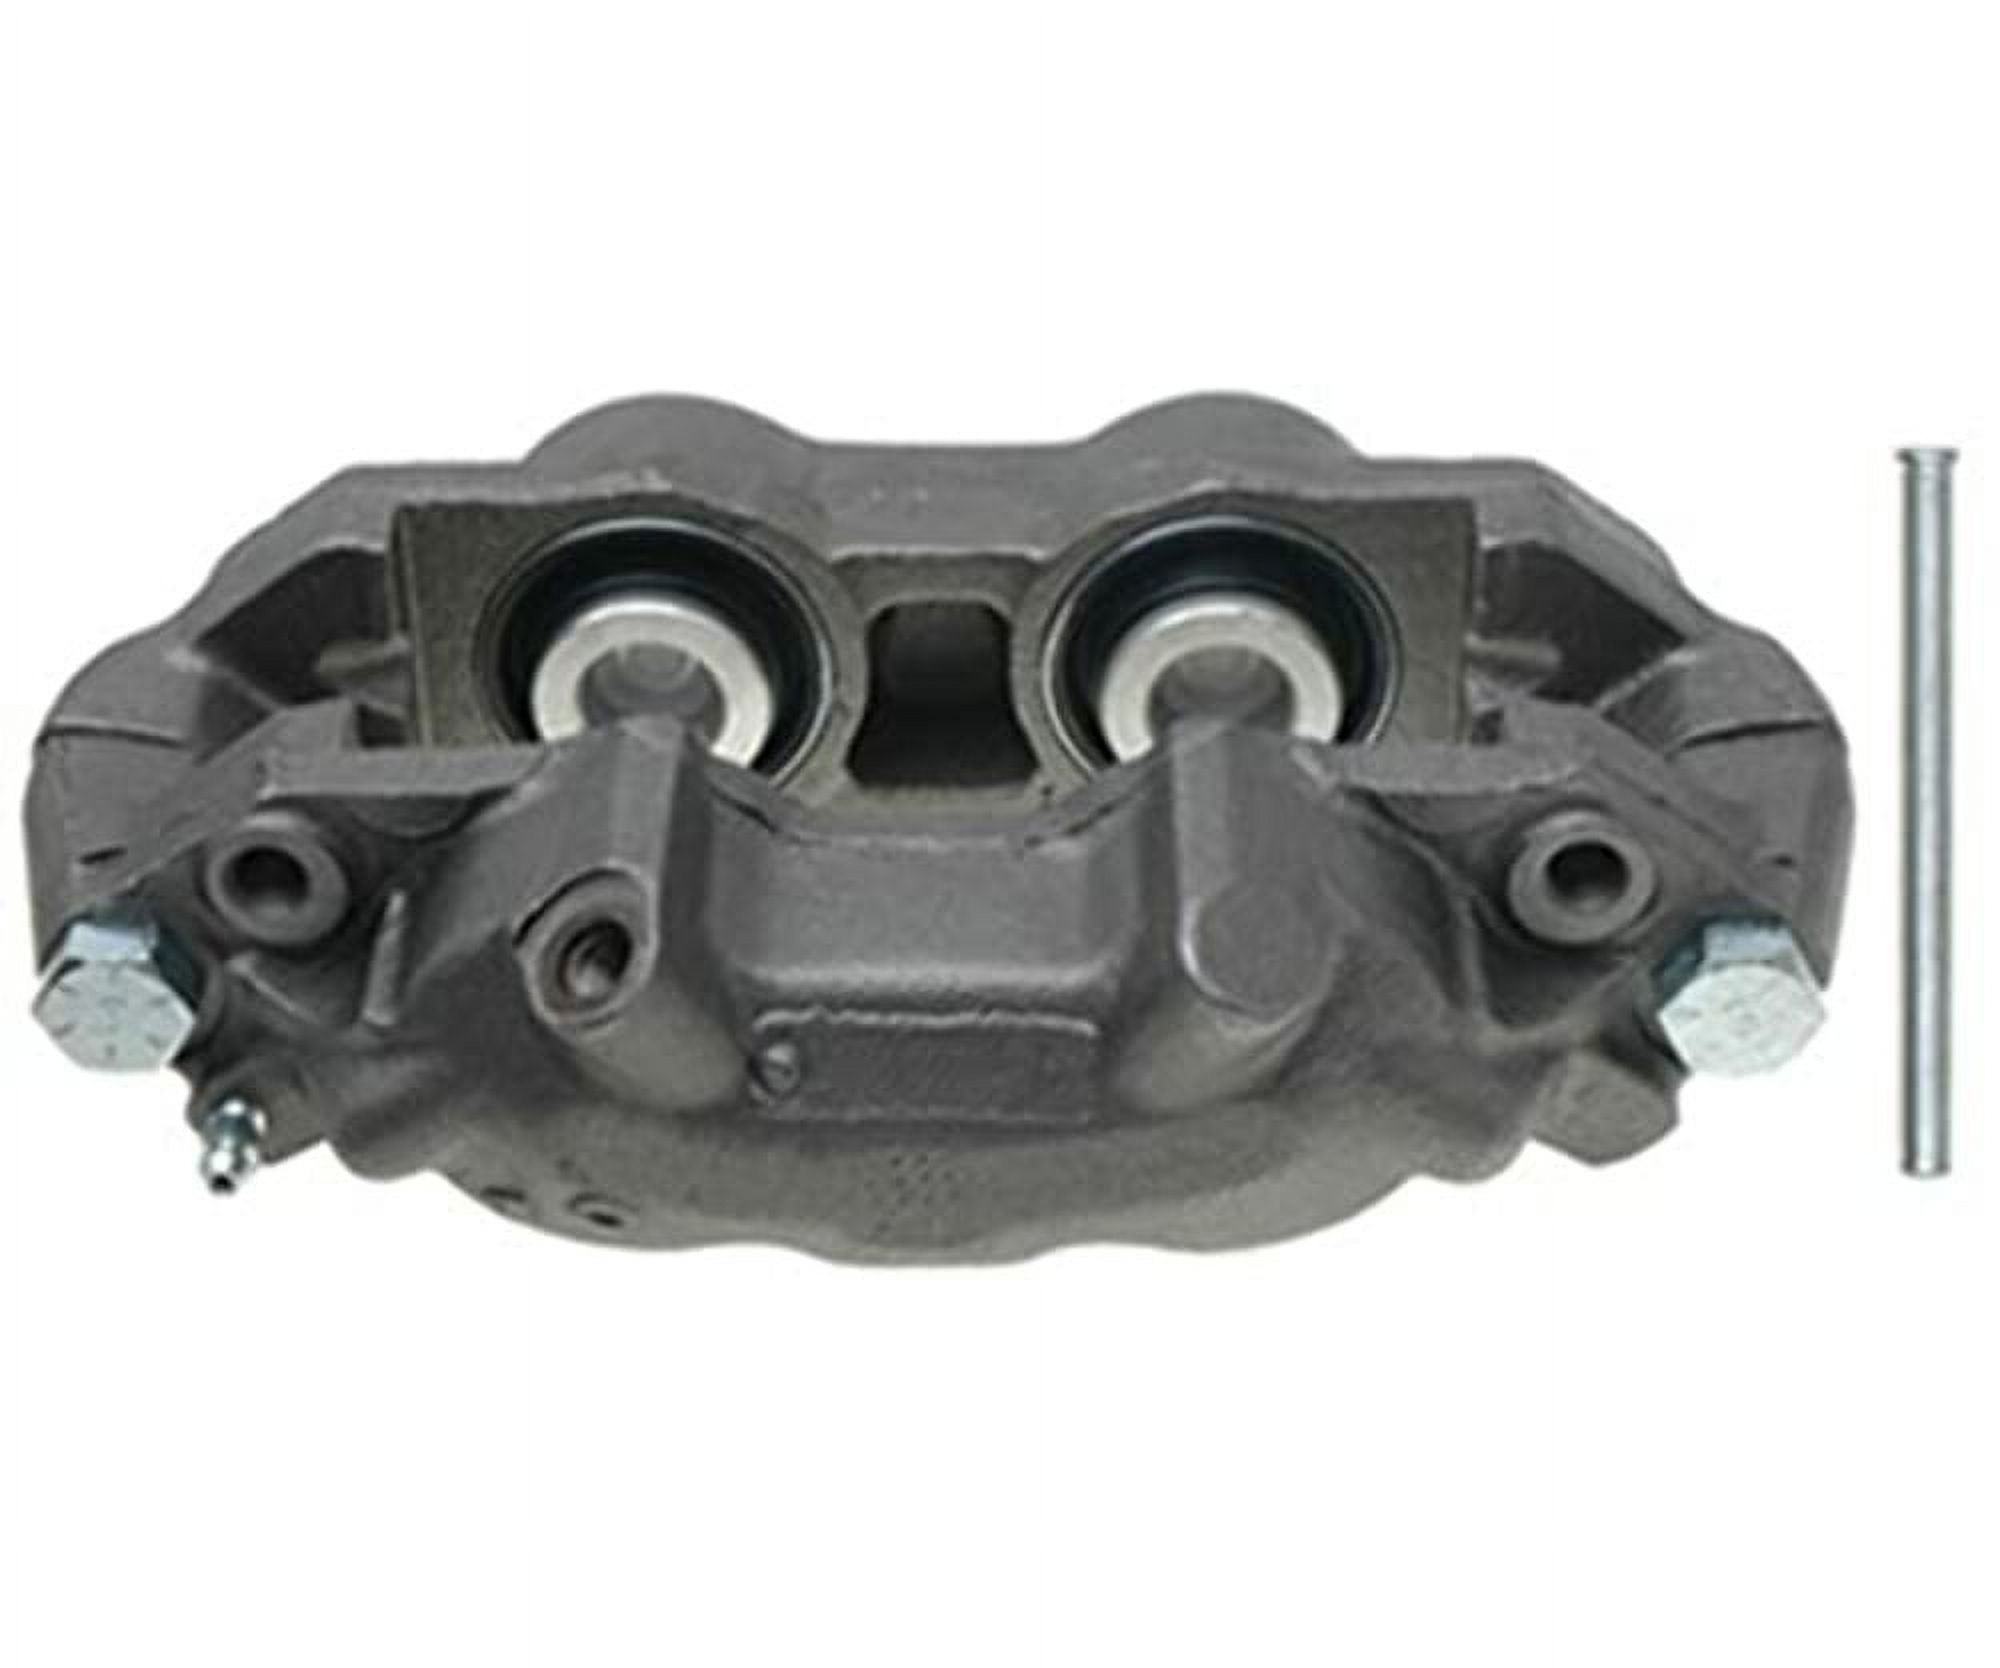 Raybestos RC8001 Professional Grade Remanufactured Loaded Disc Brake Caliper Fits select: 1966-1982 CHEVROLET CORVETTE - image 2 of 6